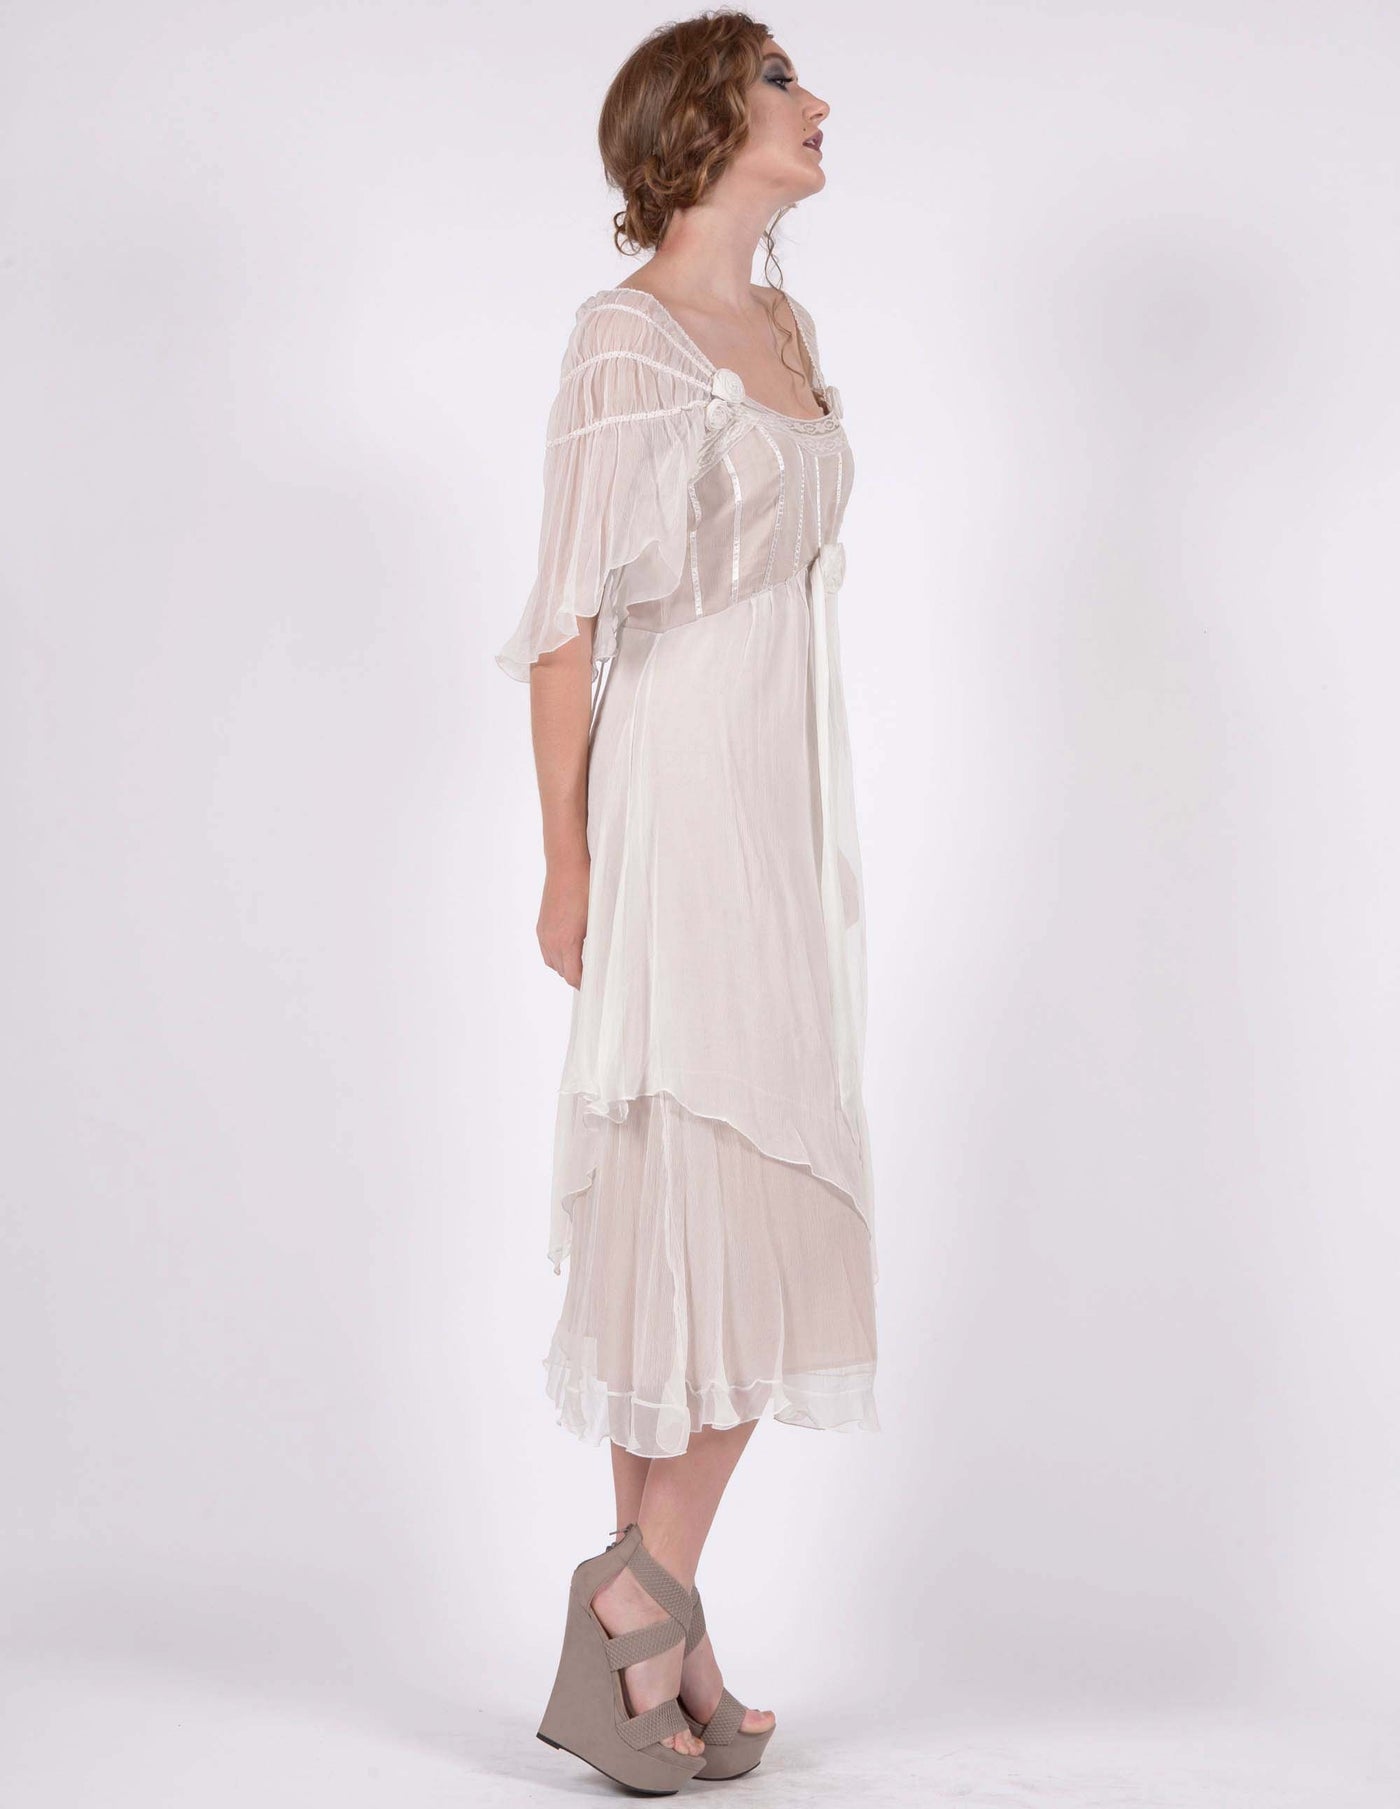 Othelia Off-Shoulder Summer Party Dress in Ivory-Tea by Nataya - SOLD OUT